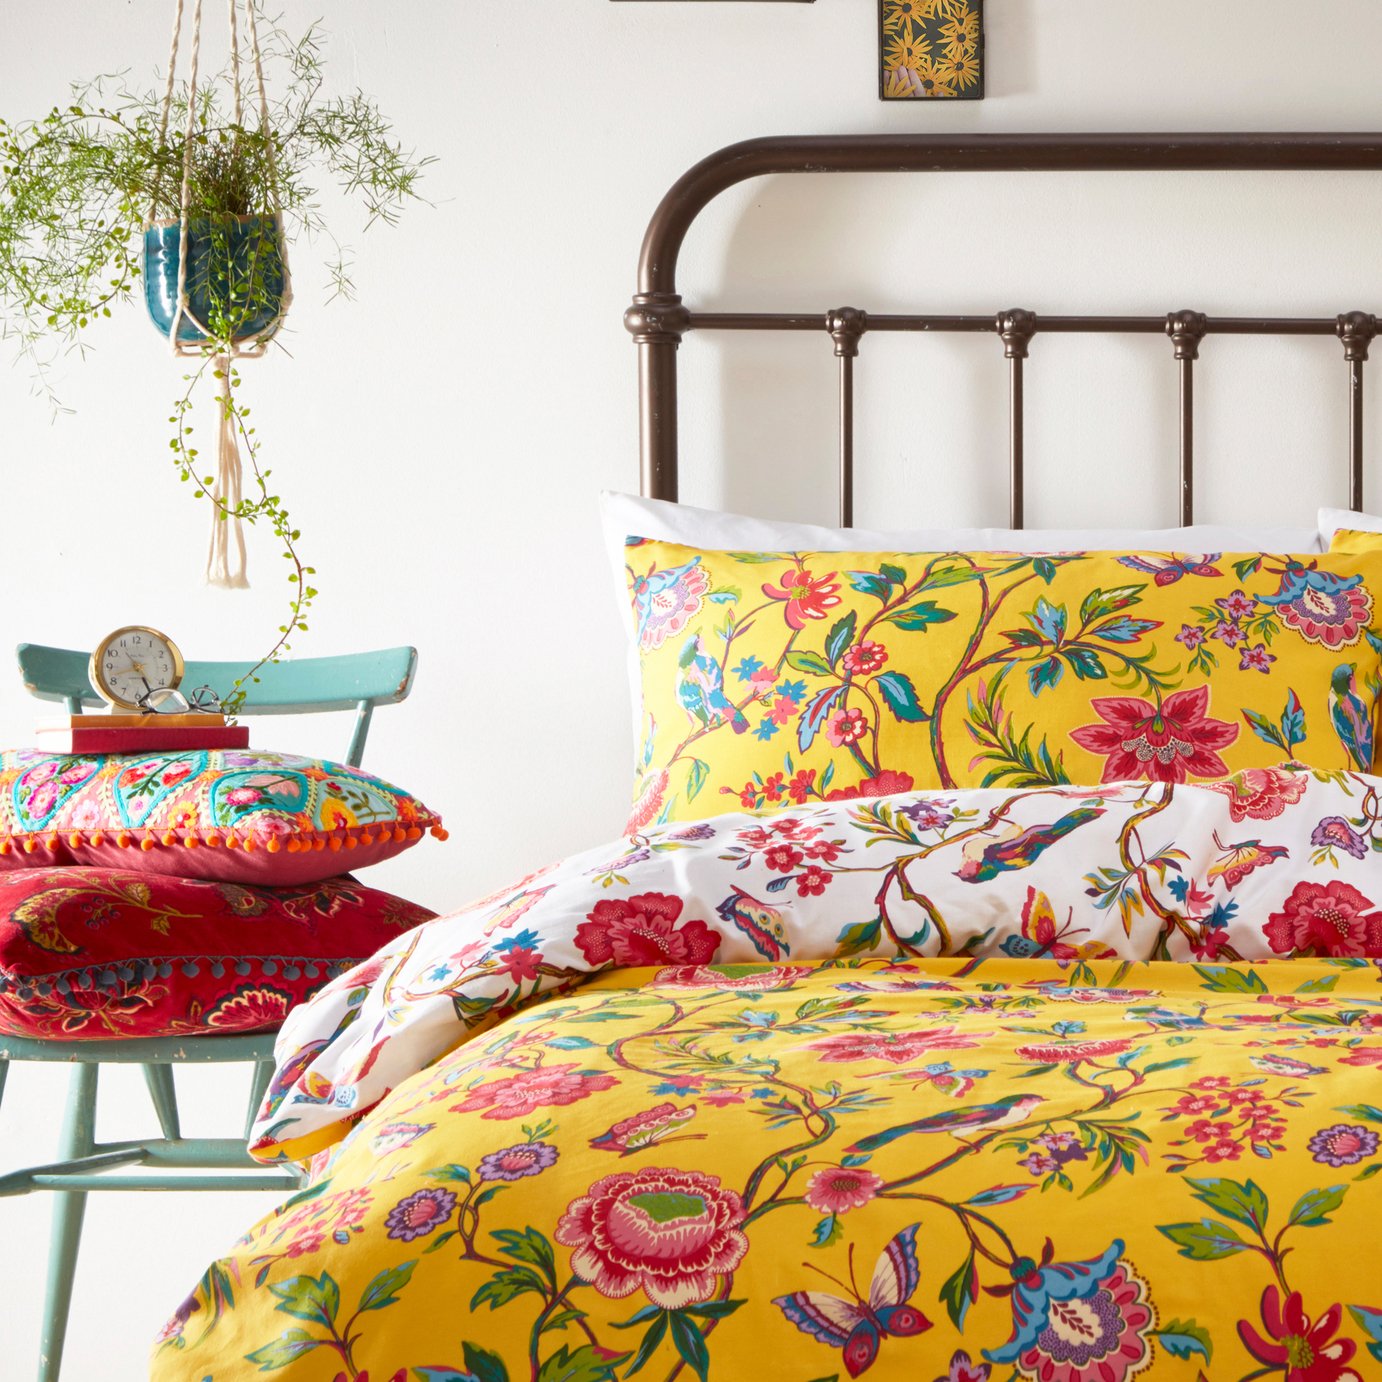 Furn Pomelo Tropical Floral Yellow Bedding Set - Double